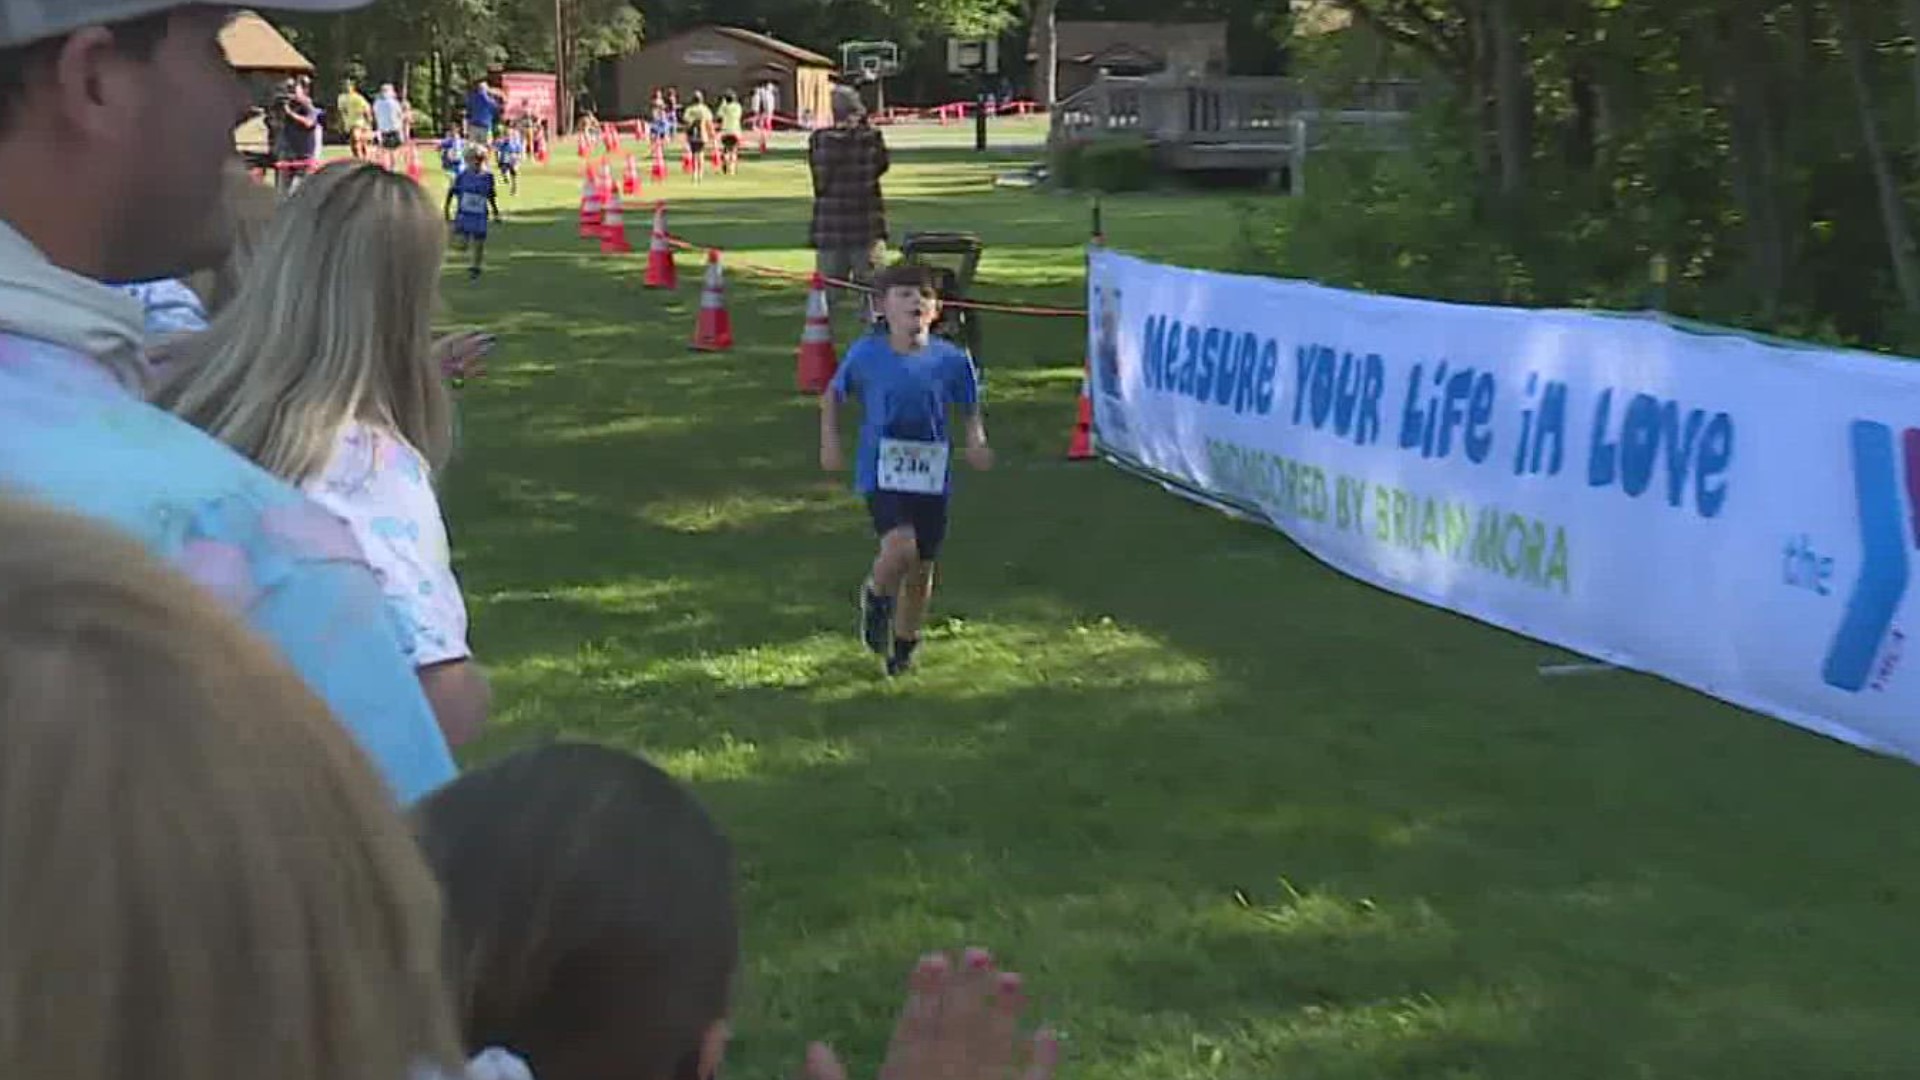 Dedicated to a victim of the Sandy Hook tragedy, the race raises funds for YMCA programs.